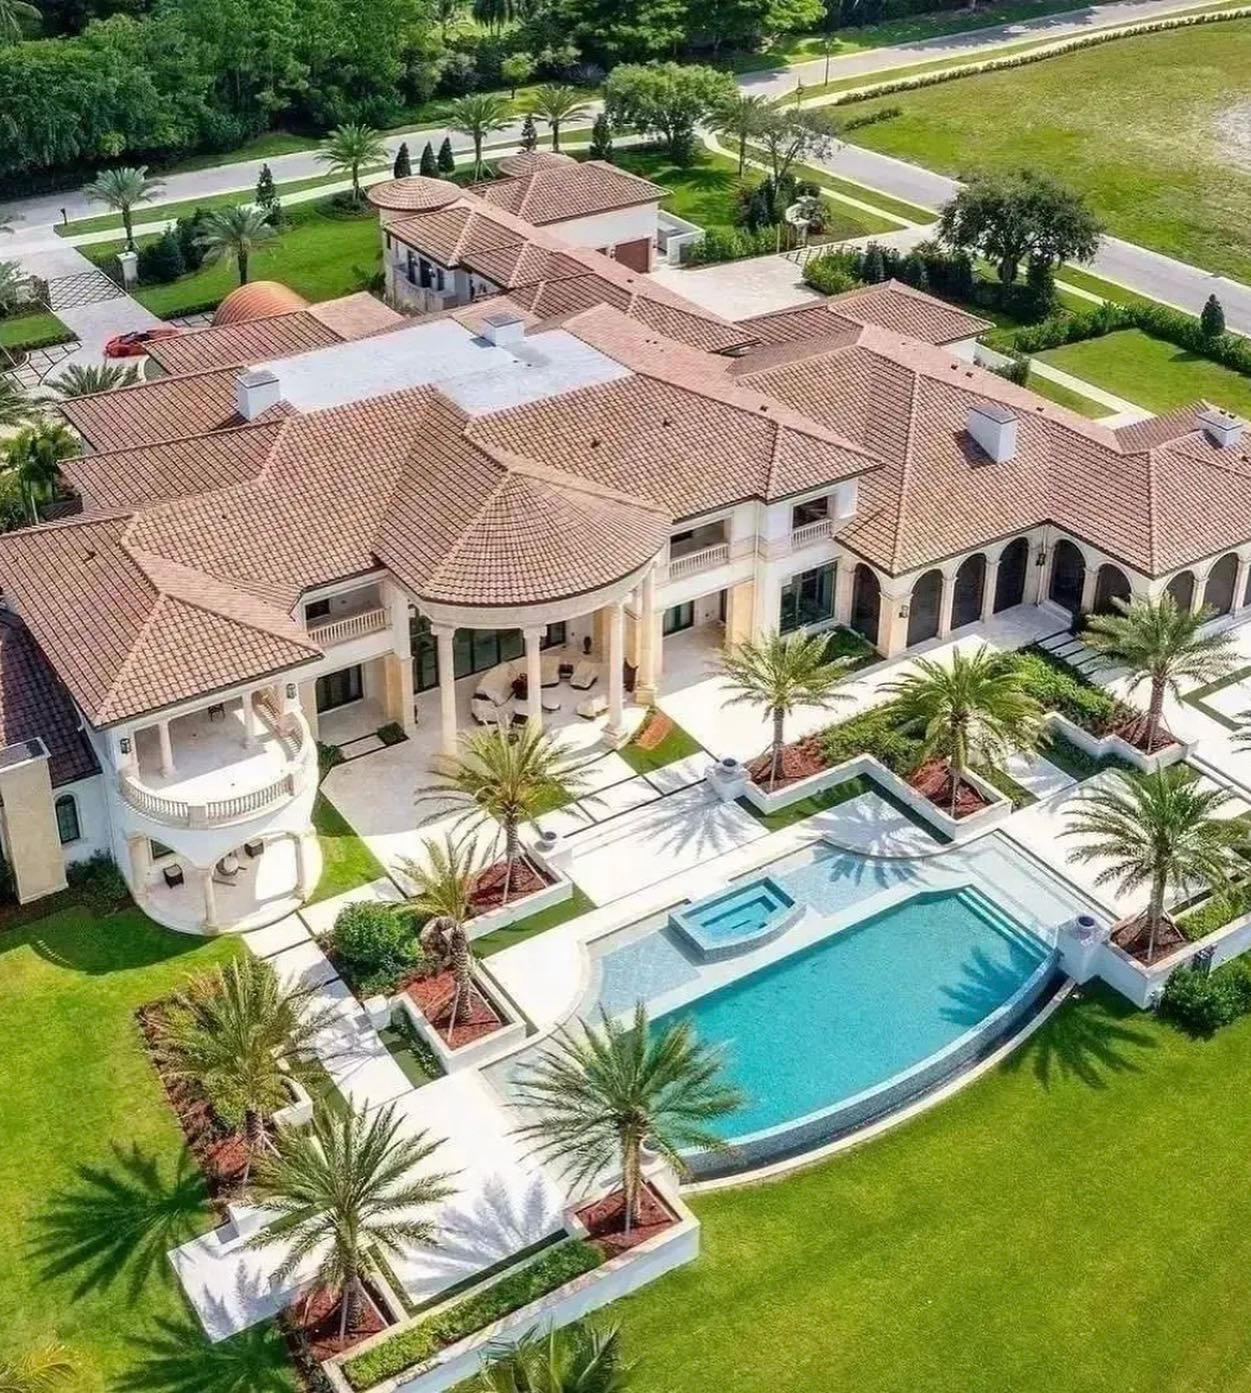 Luxurious Mordern Houses - This palatial estate is situated inDelray Beach, Florida for $19,200,000